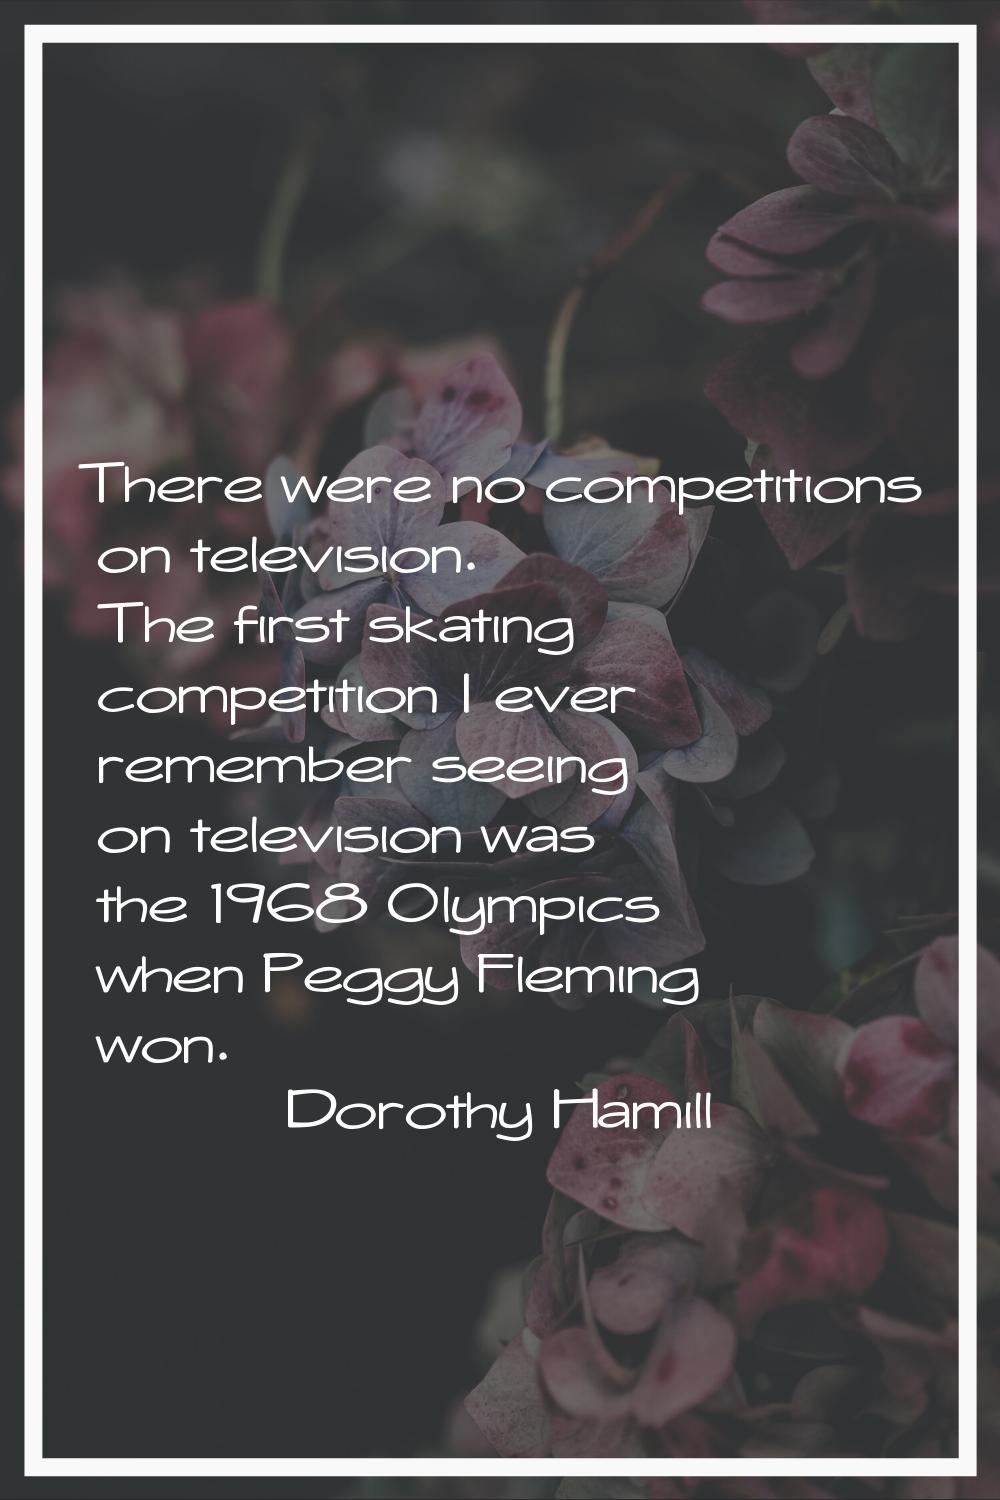 There were no competitions on television. The first skating competition I ever remember seeing on t